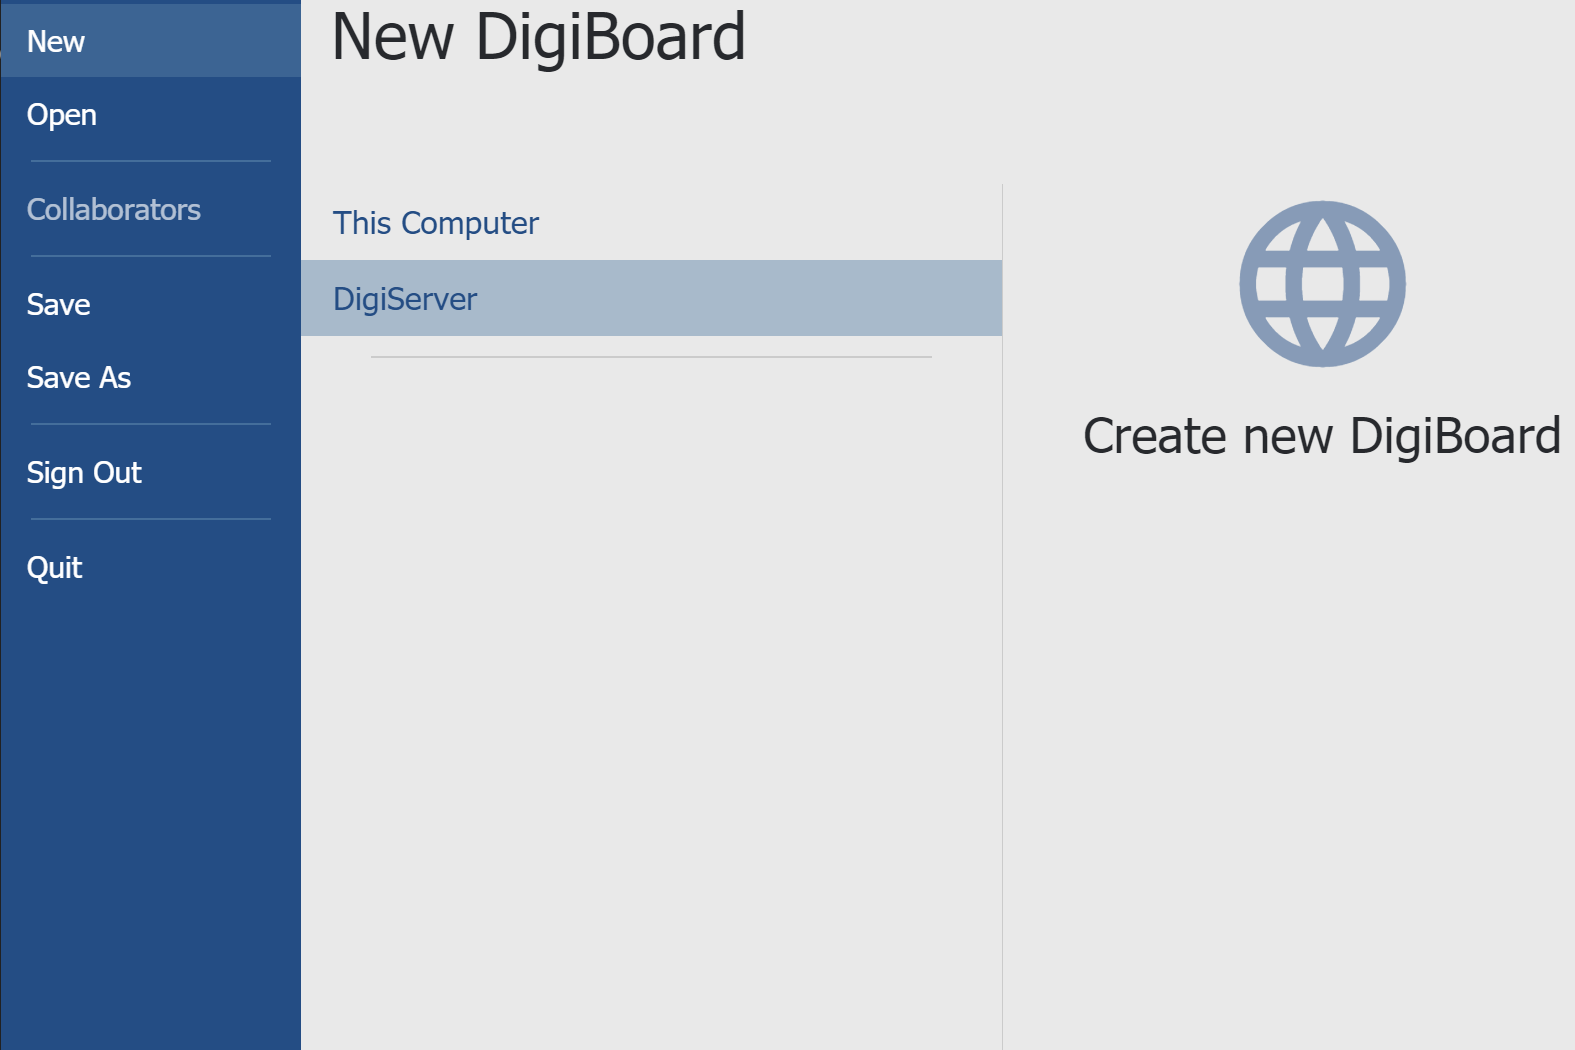 The DigiBoard